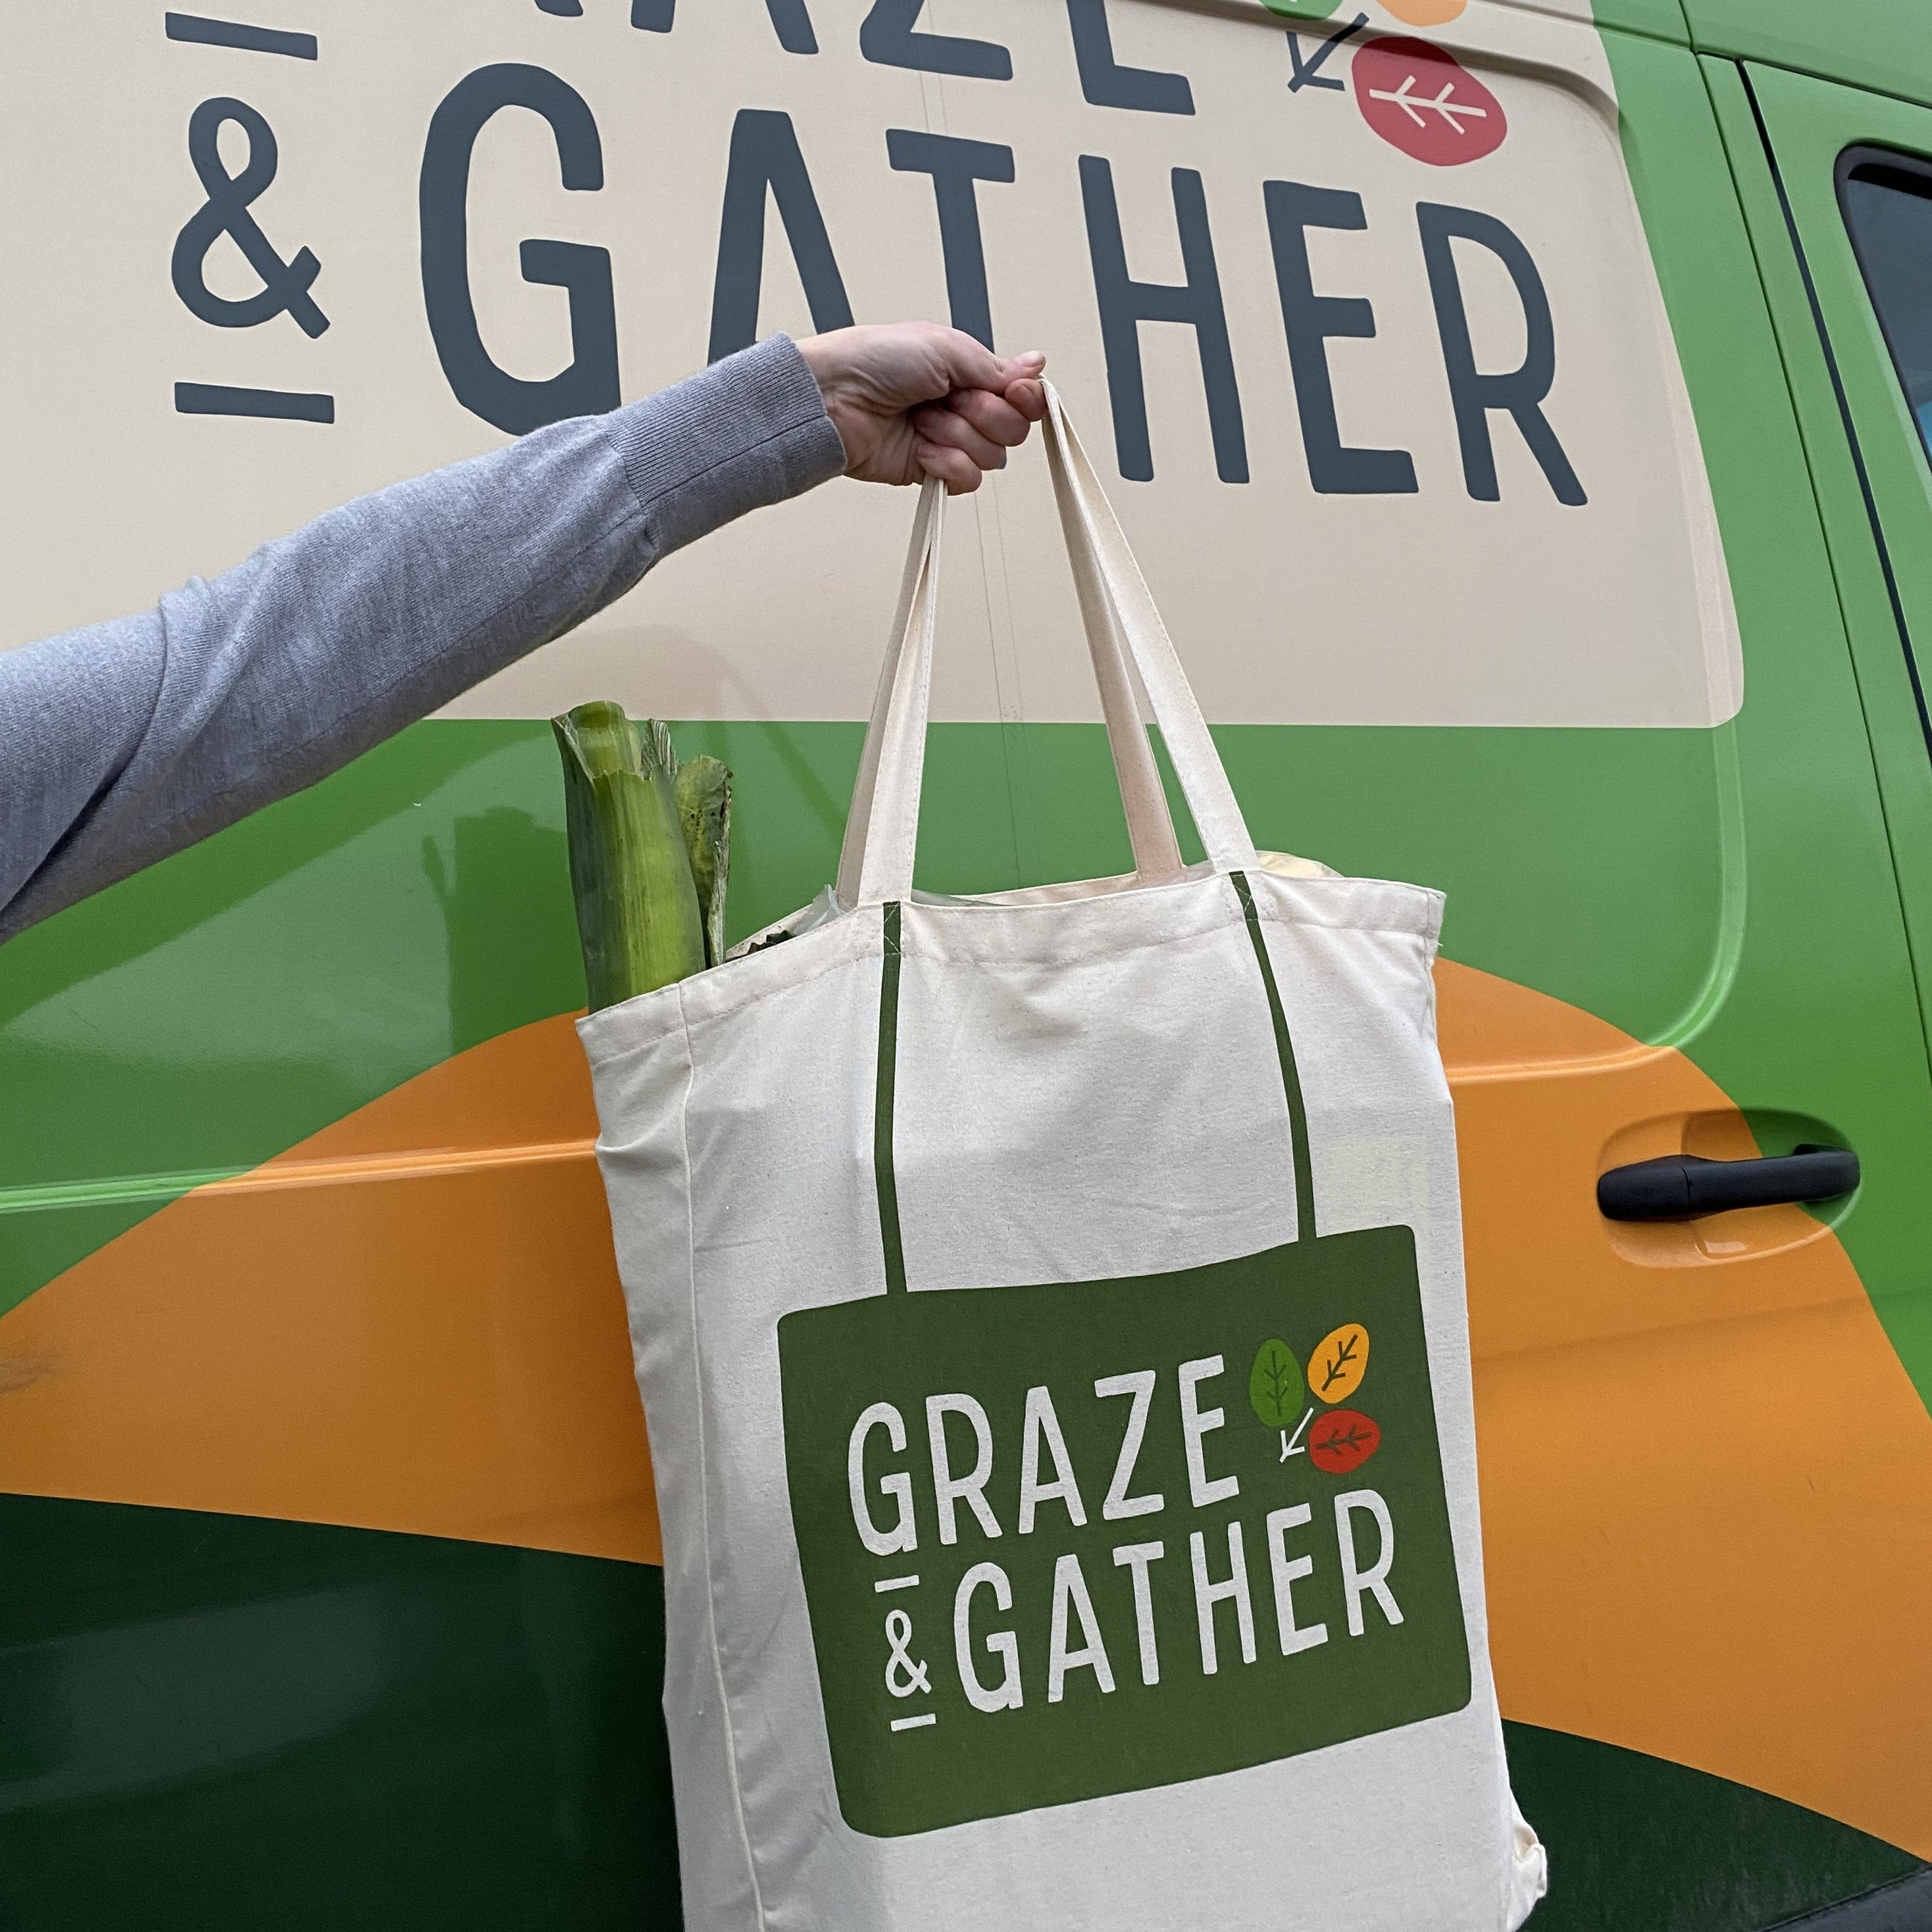 Graze & Gather tote in front of Graze & Gather delivery van